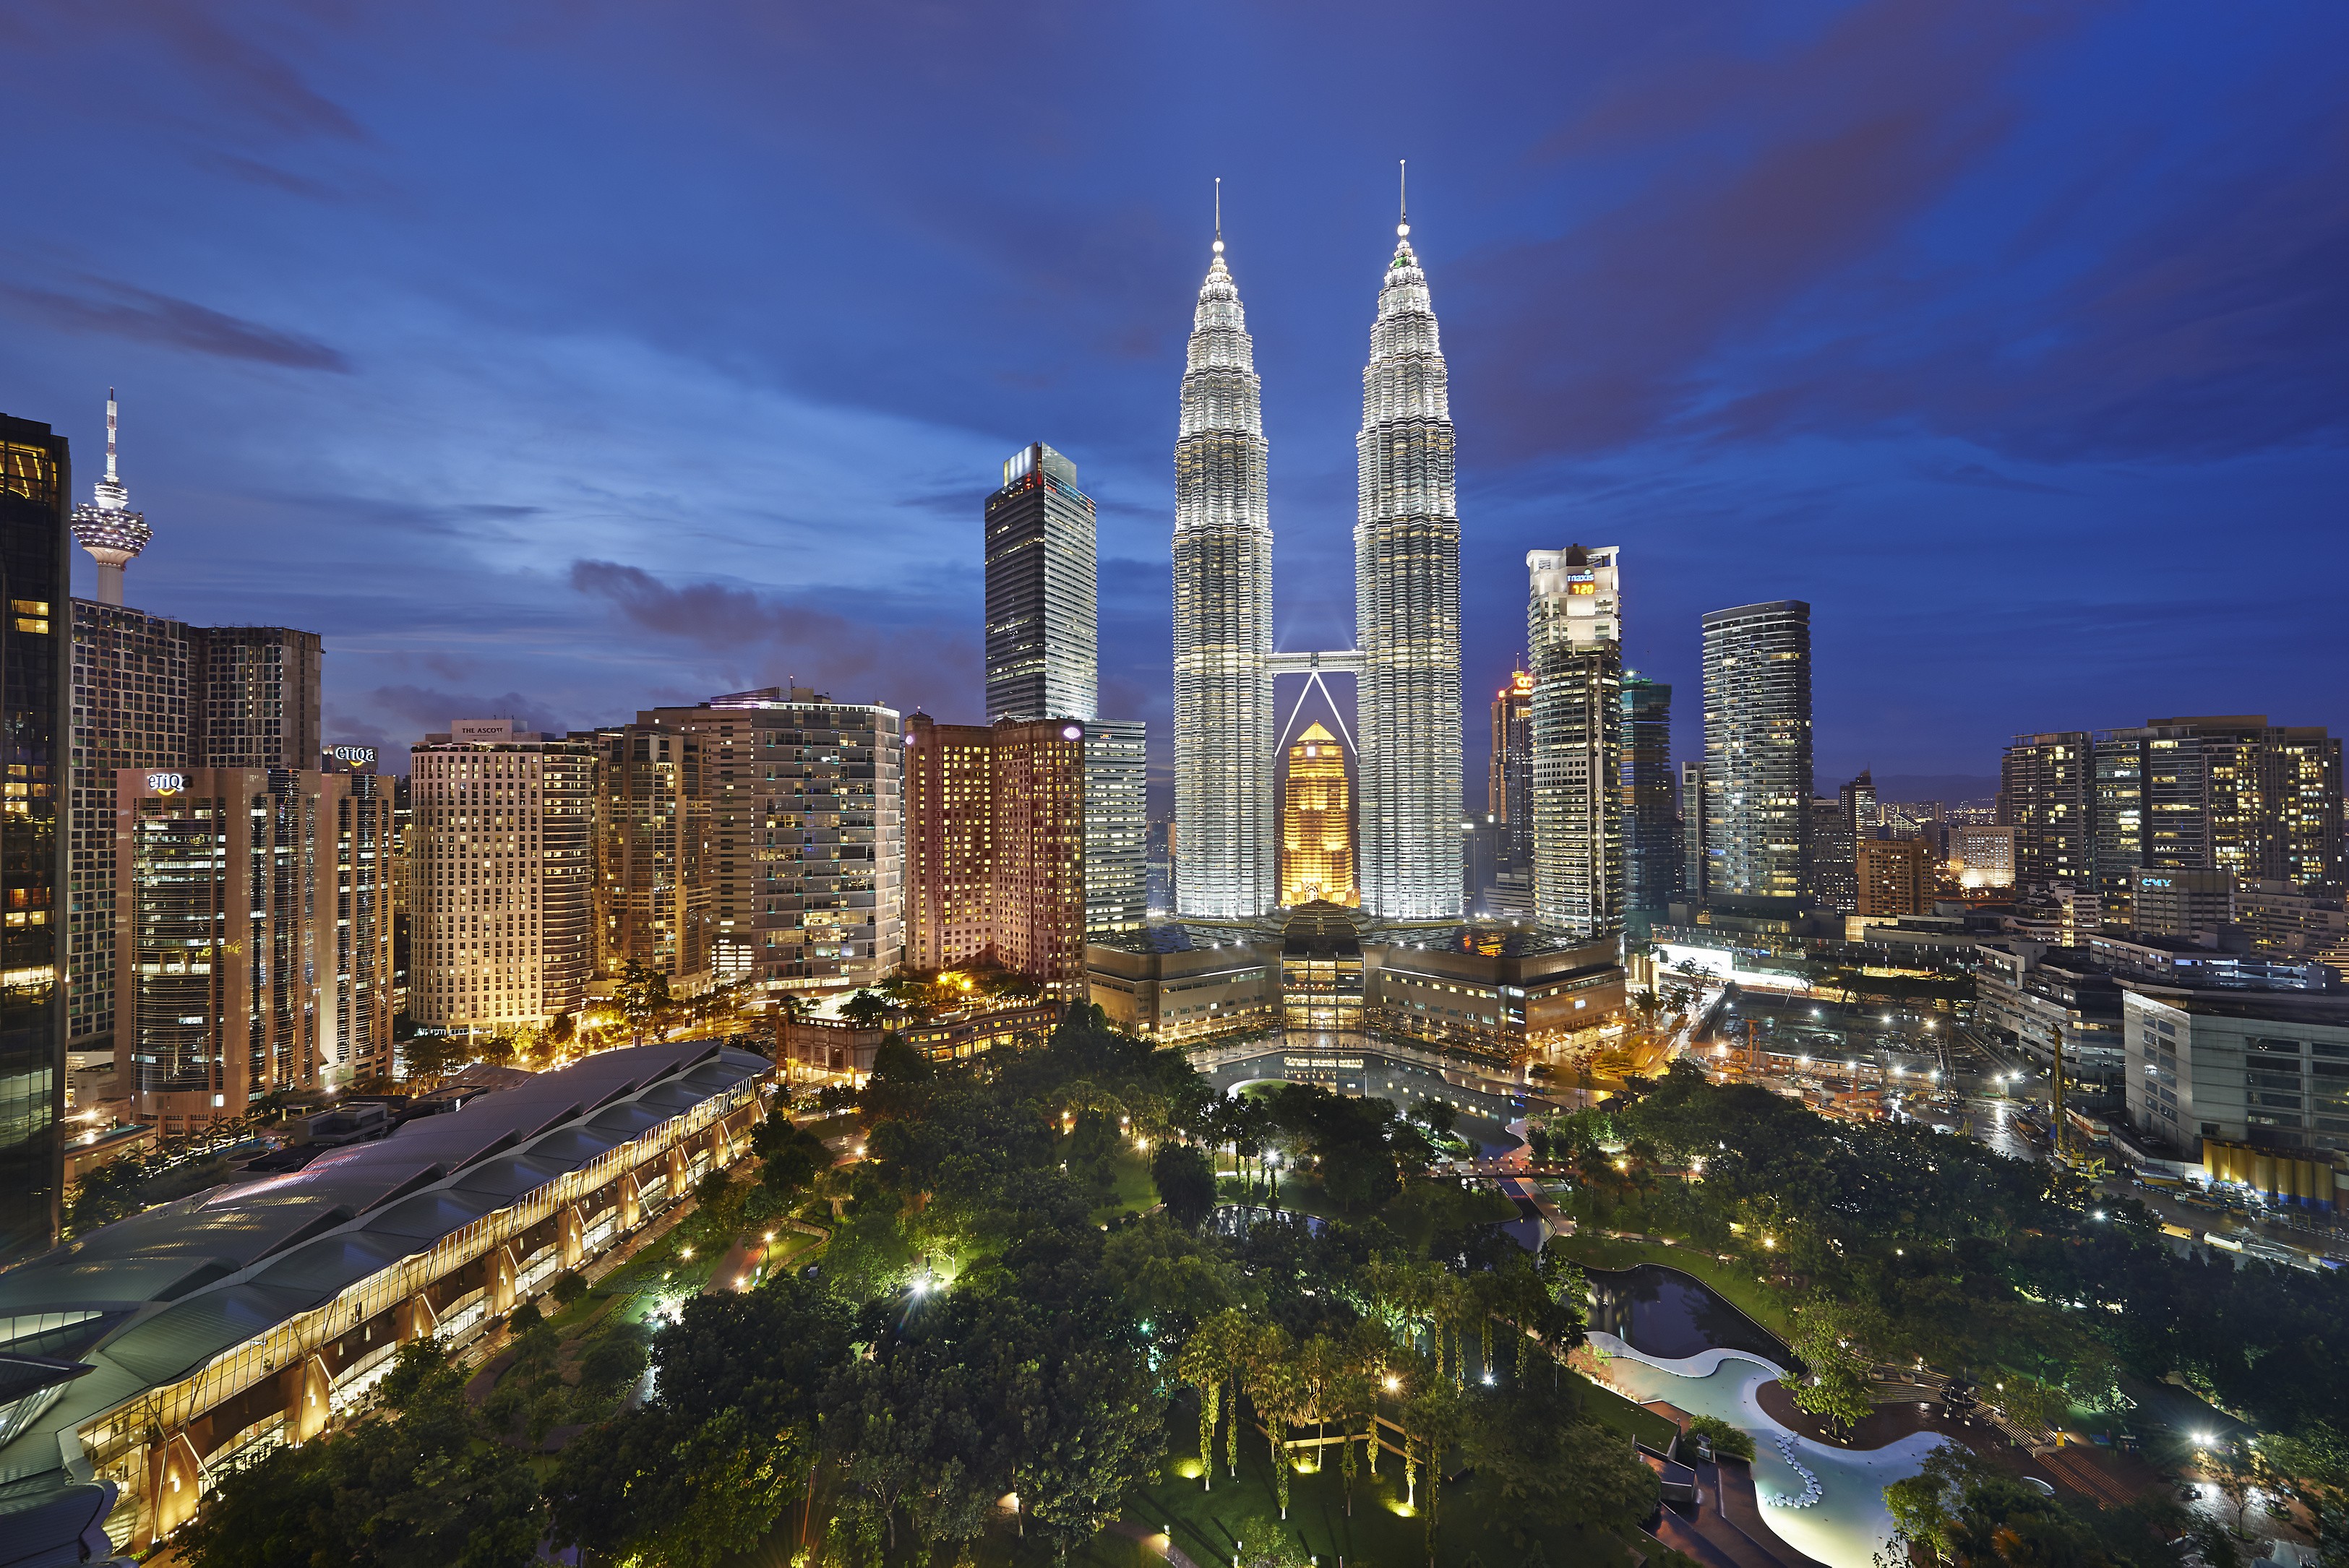 Kuala Lumpur made the list of top 10 cities for luxury store openings last year, according to the Savills Global Luxury Retail 2018 Outlook report.